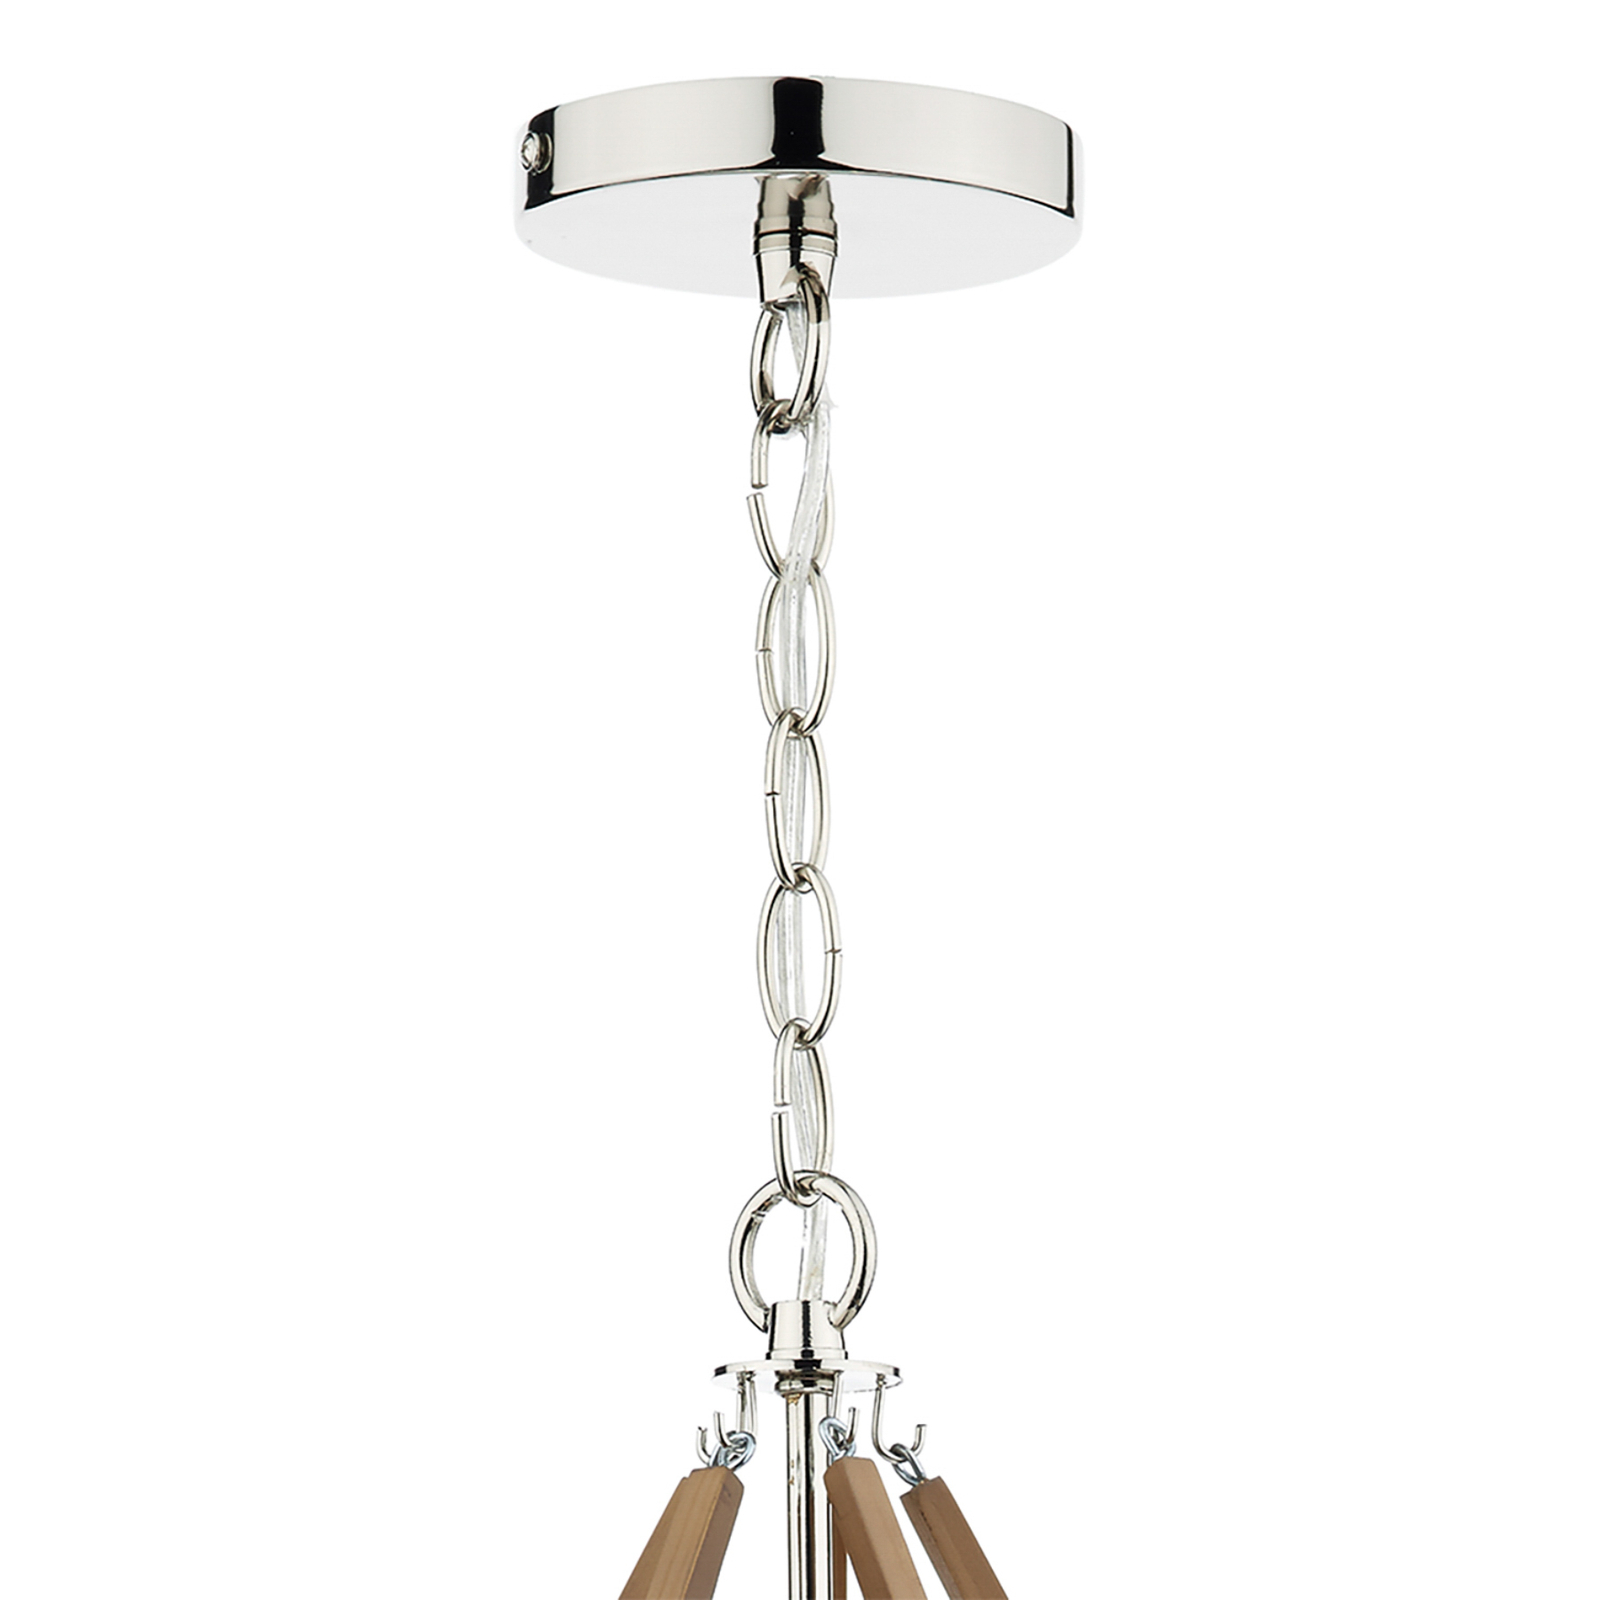 Hotel pendant light in nickel with wooden details